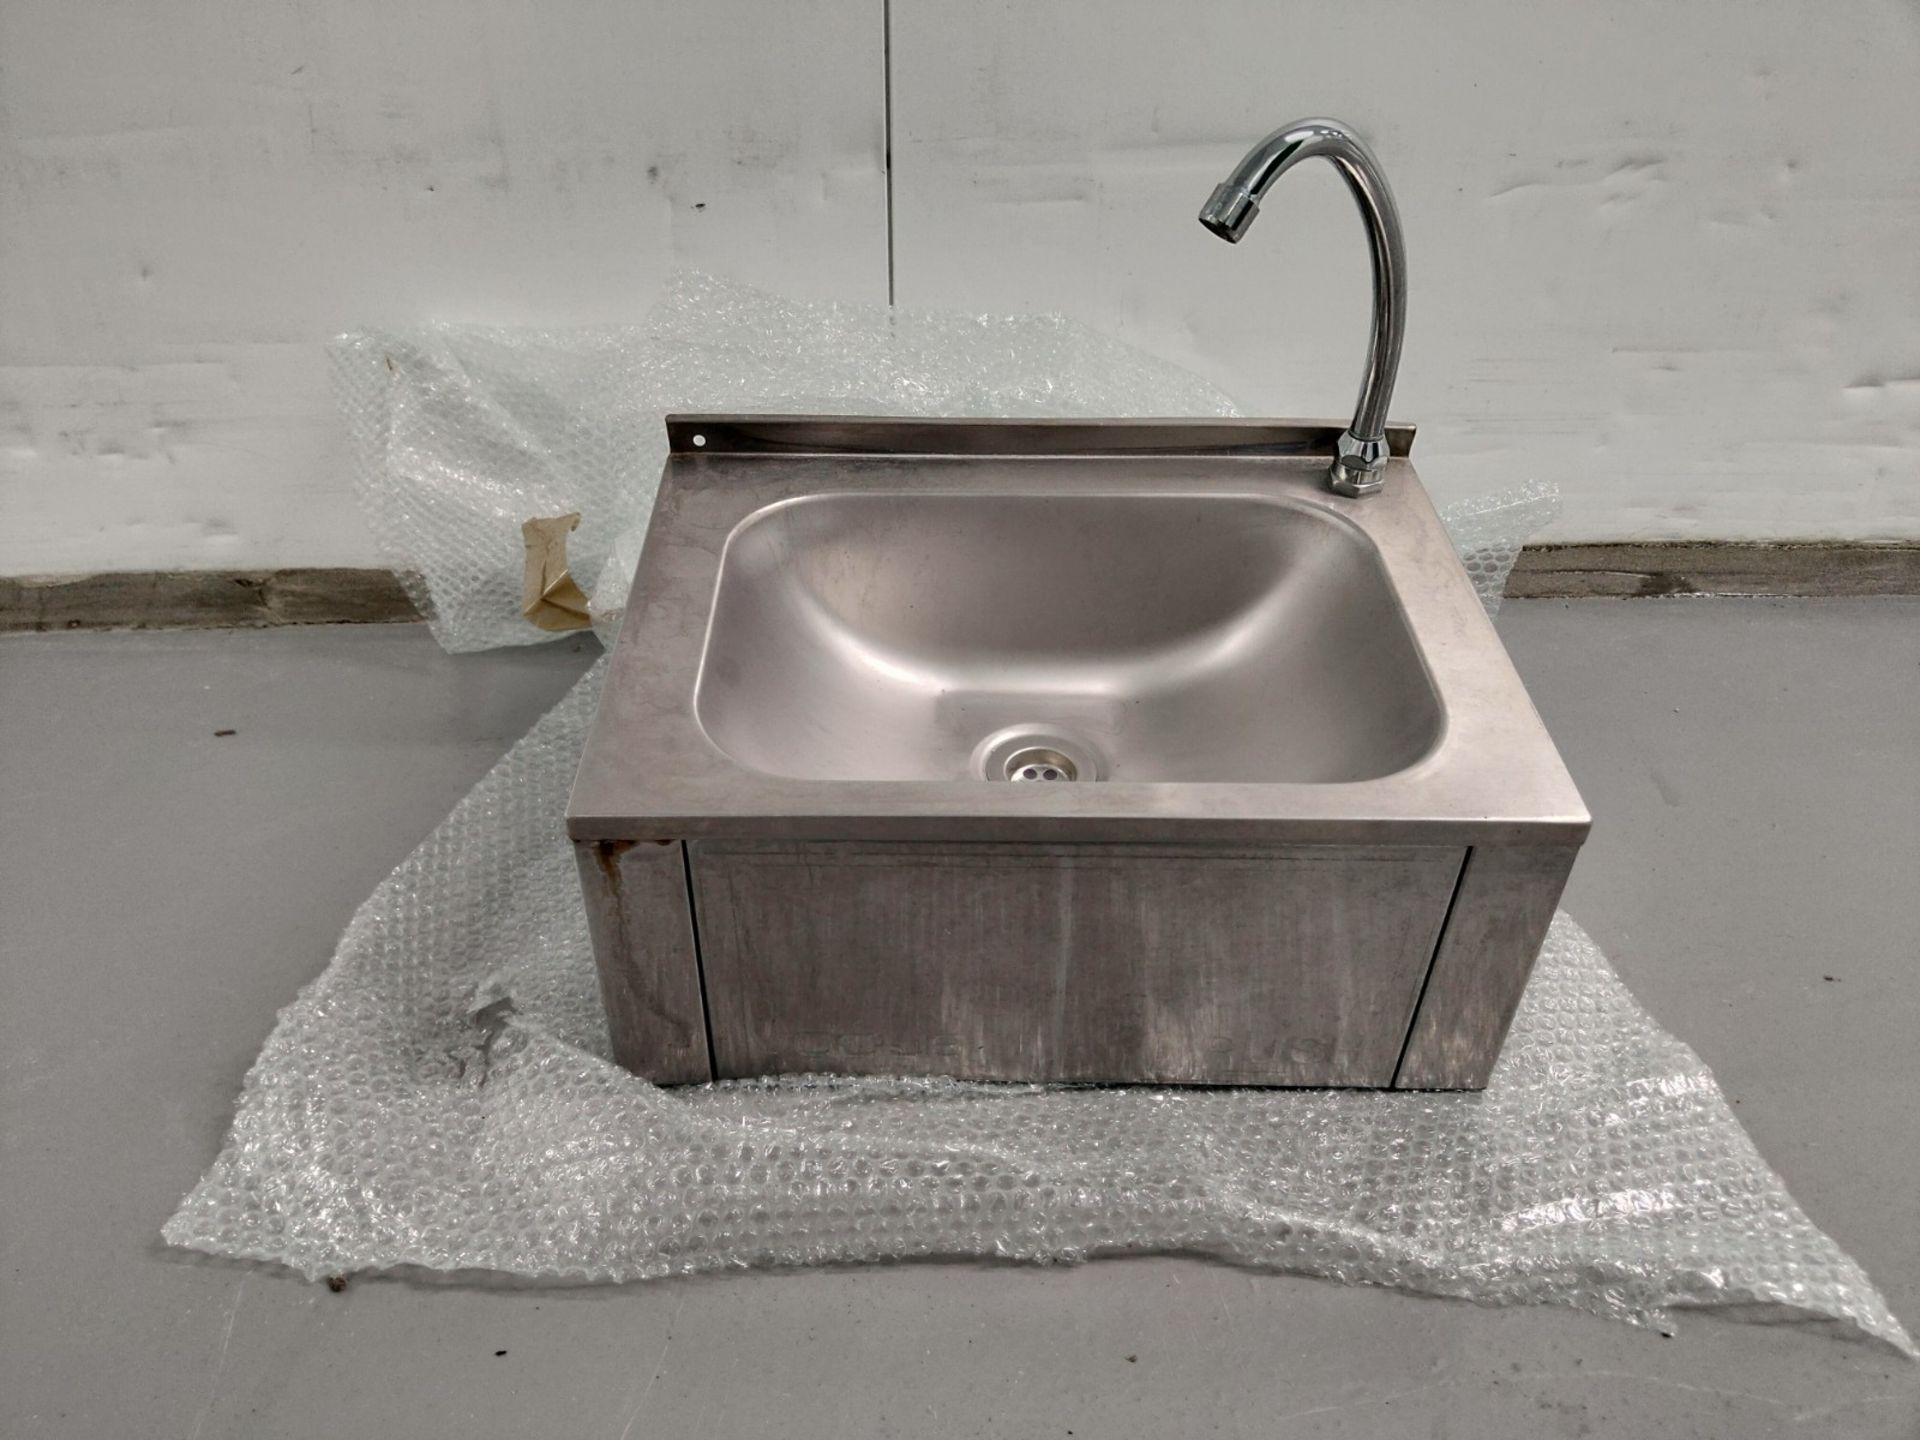 Vogue Stainless Steel Knee Operated Sink - Image 2 of 4